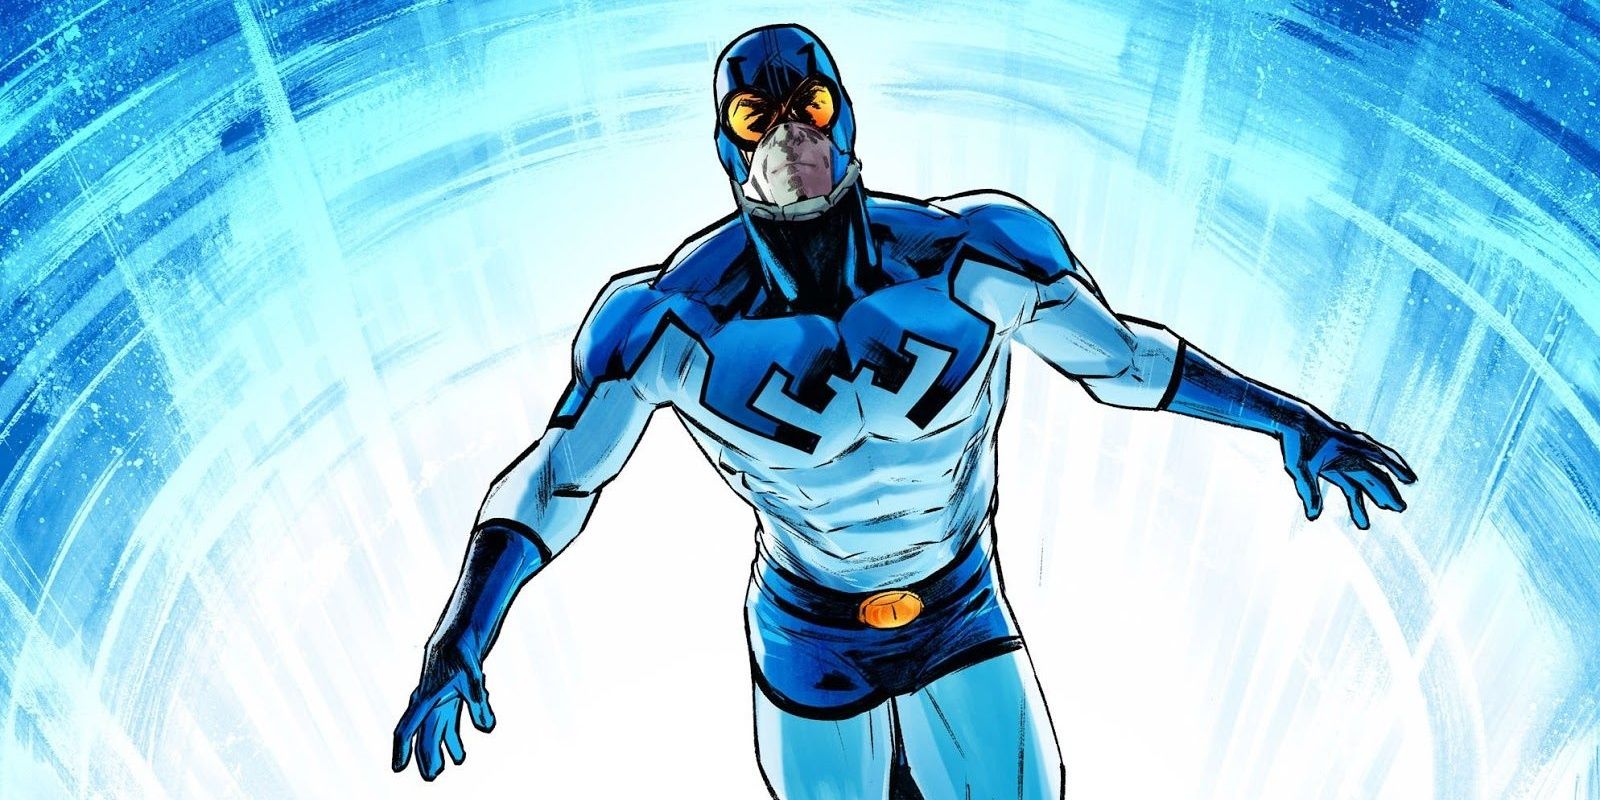 Ted Kord aka Blue Beetle emerging from a portal in DC Comics